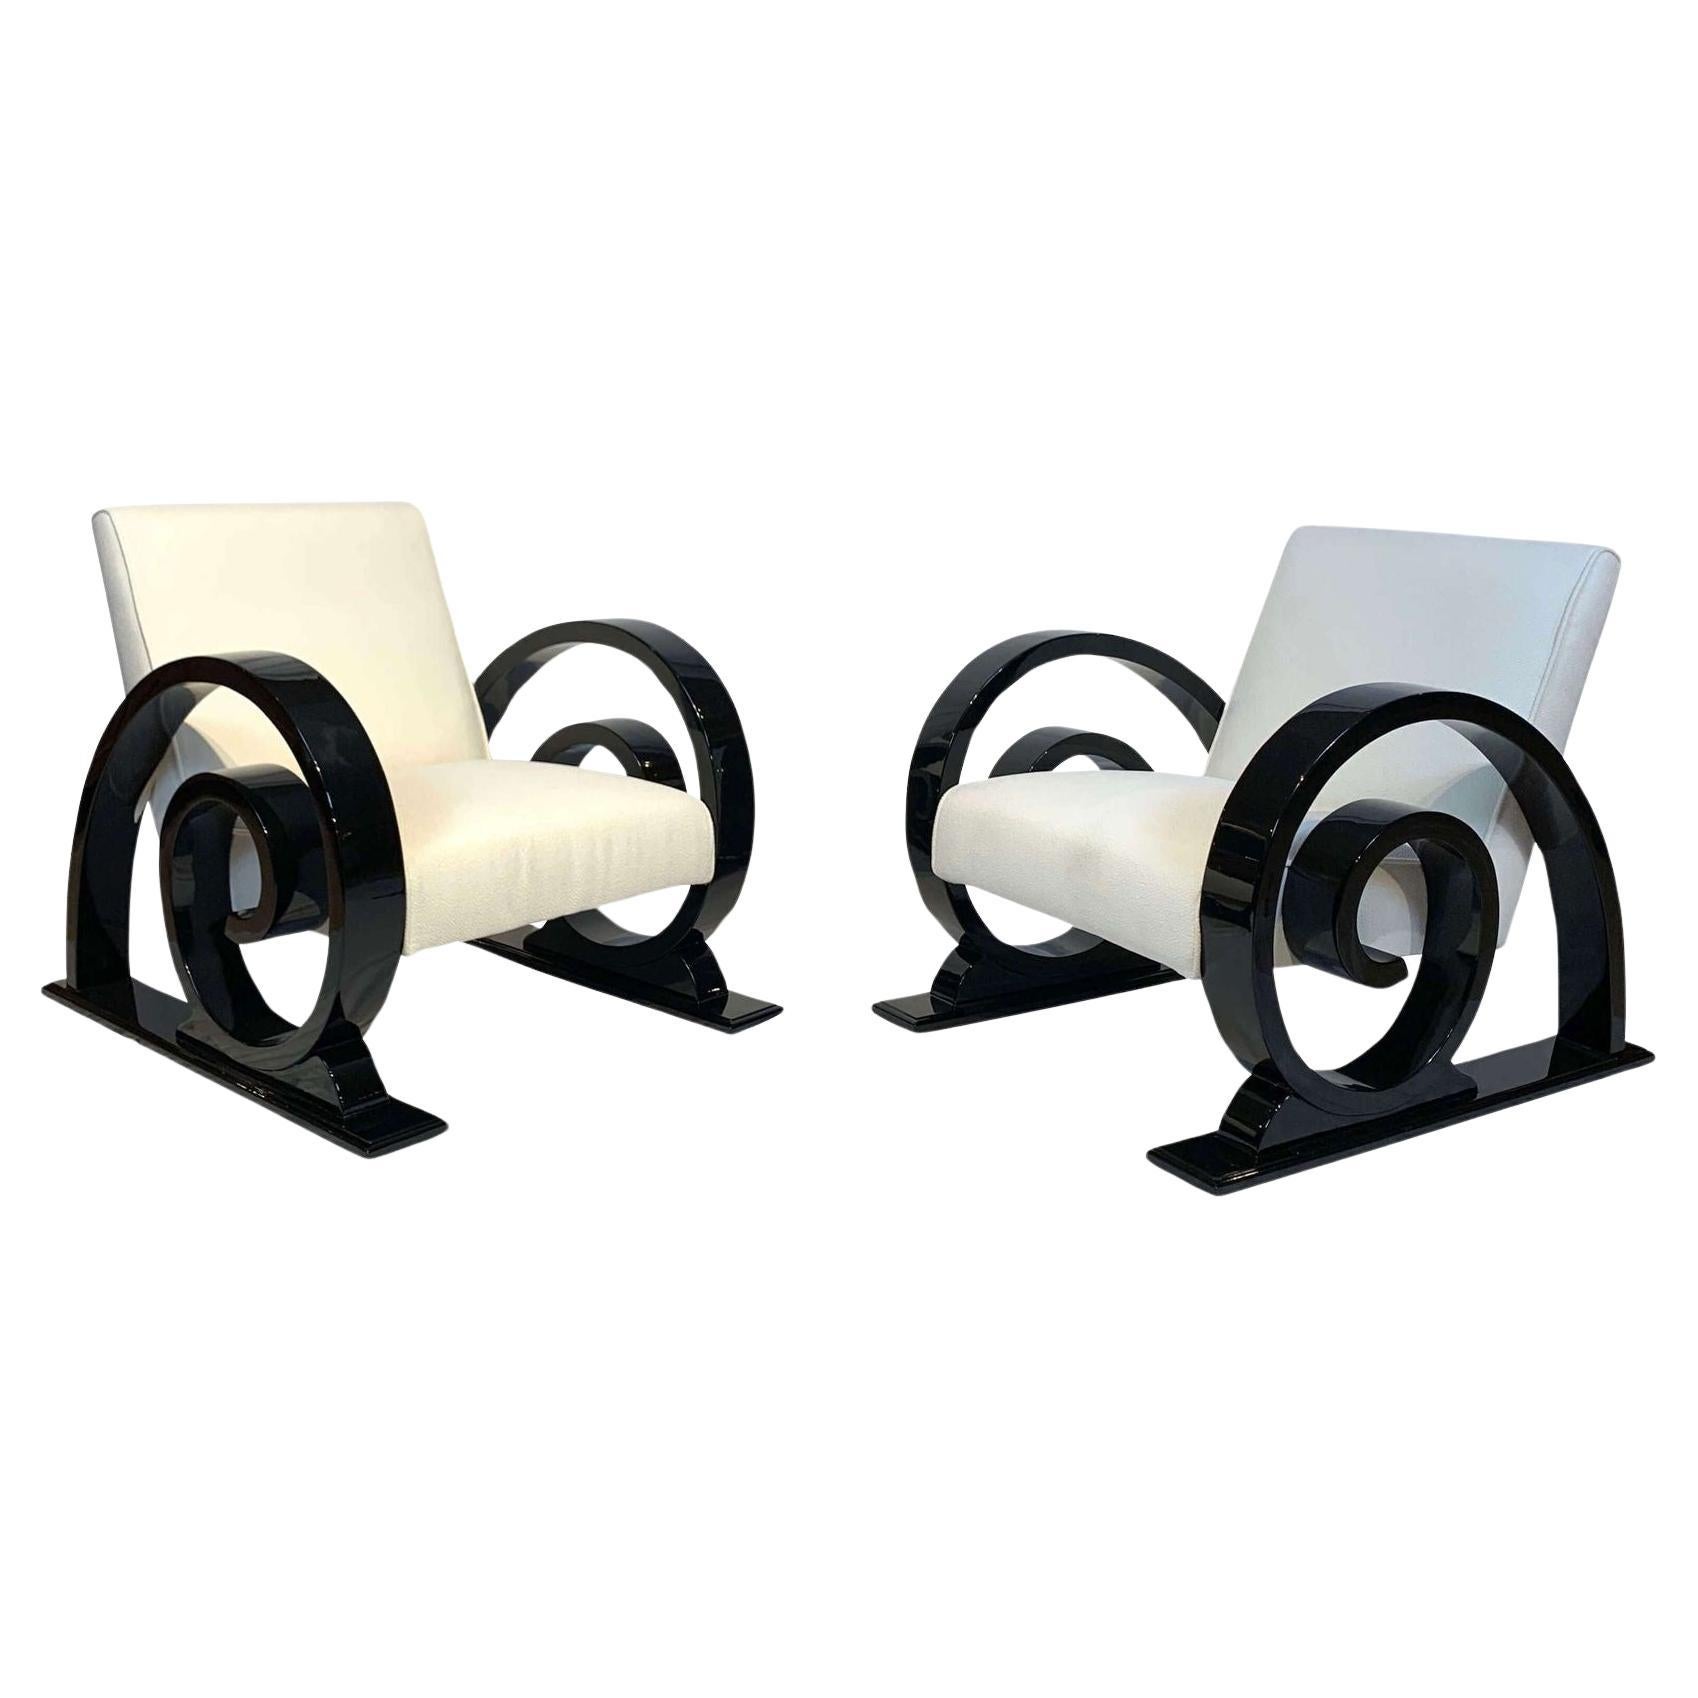 Set of Two Art Deco Club Chairs, Black Lacquer, Creme Fabric France circa 1930